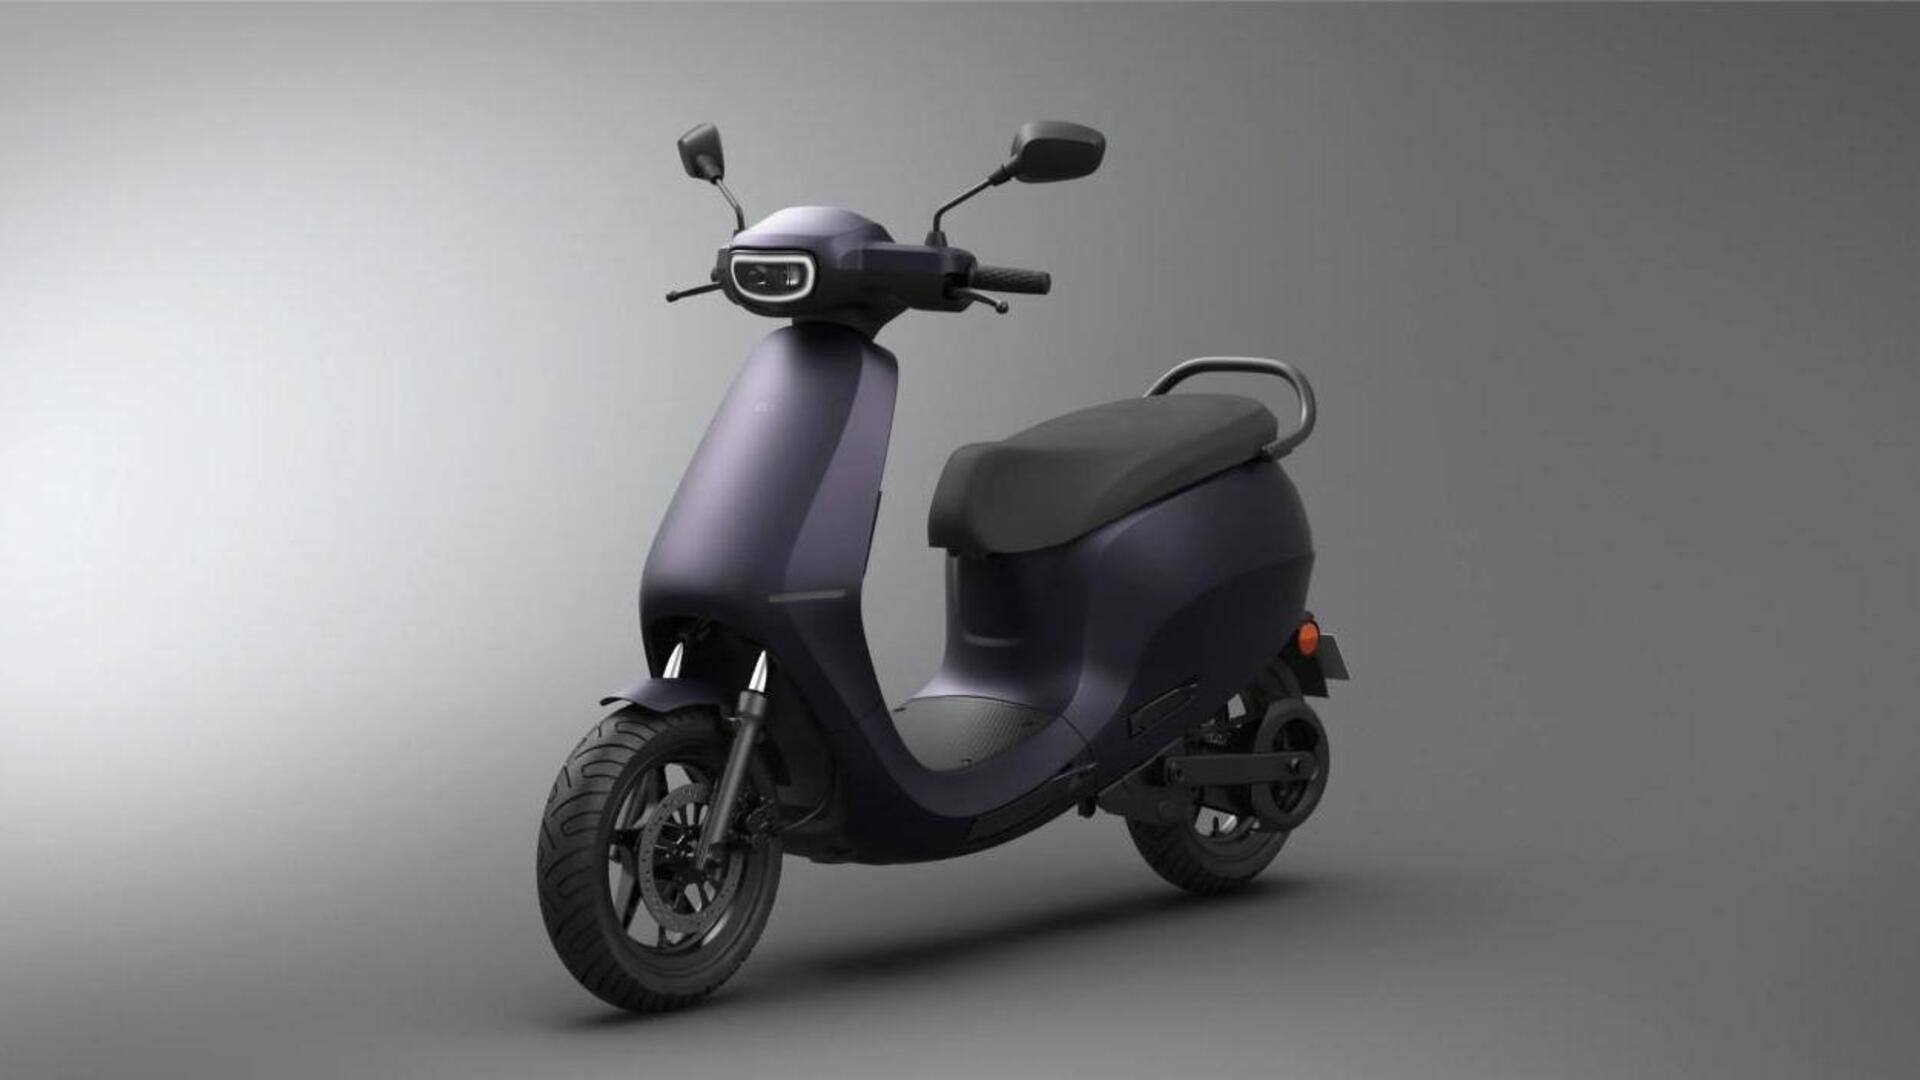 Scooter sales surpass half million mark for 4th consecutive month